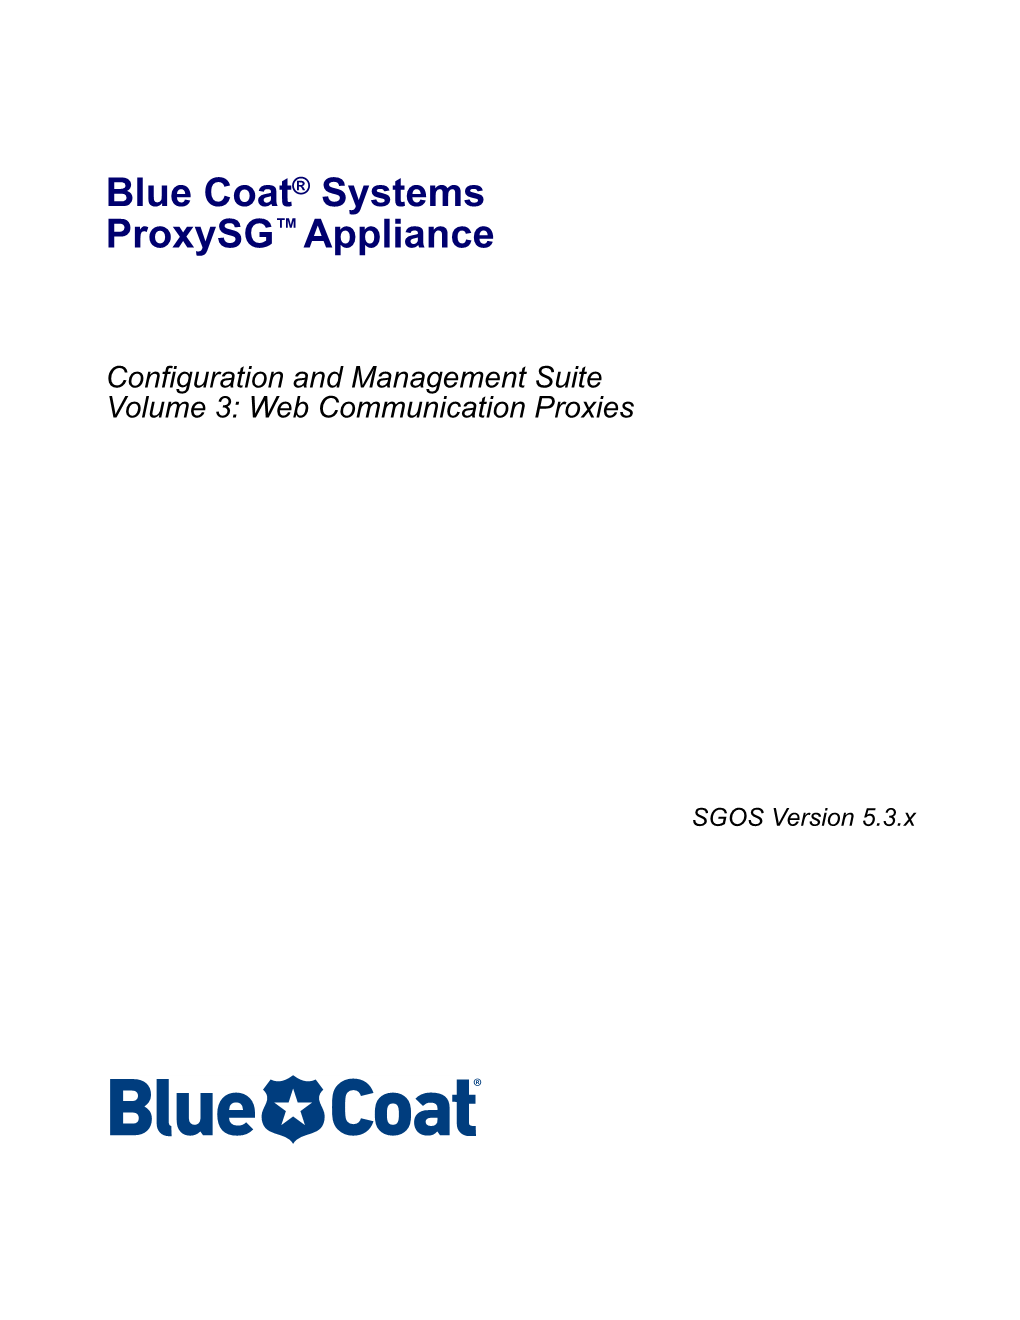 Blue Coat® Systems Proxysg™ Appliance